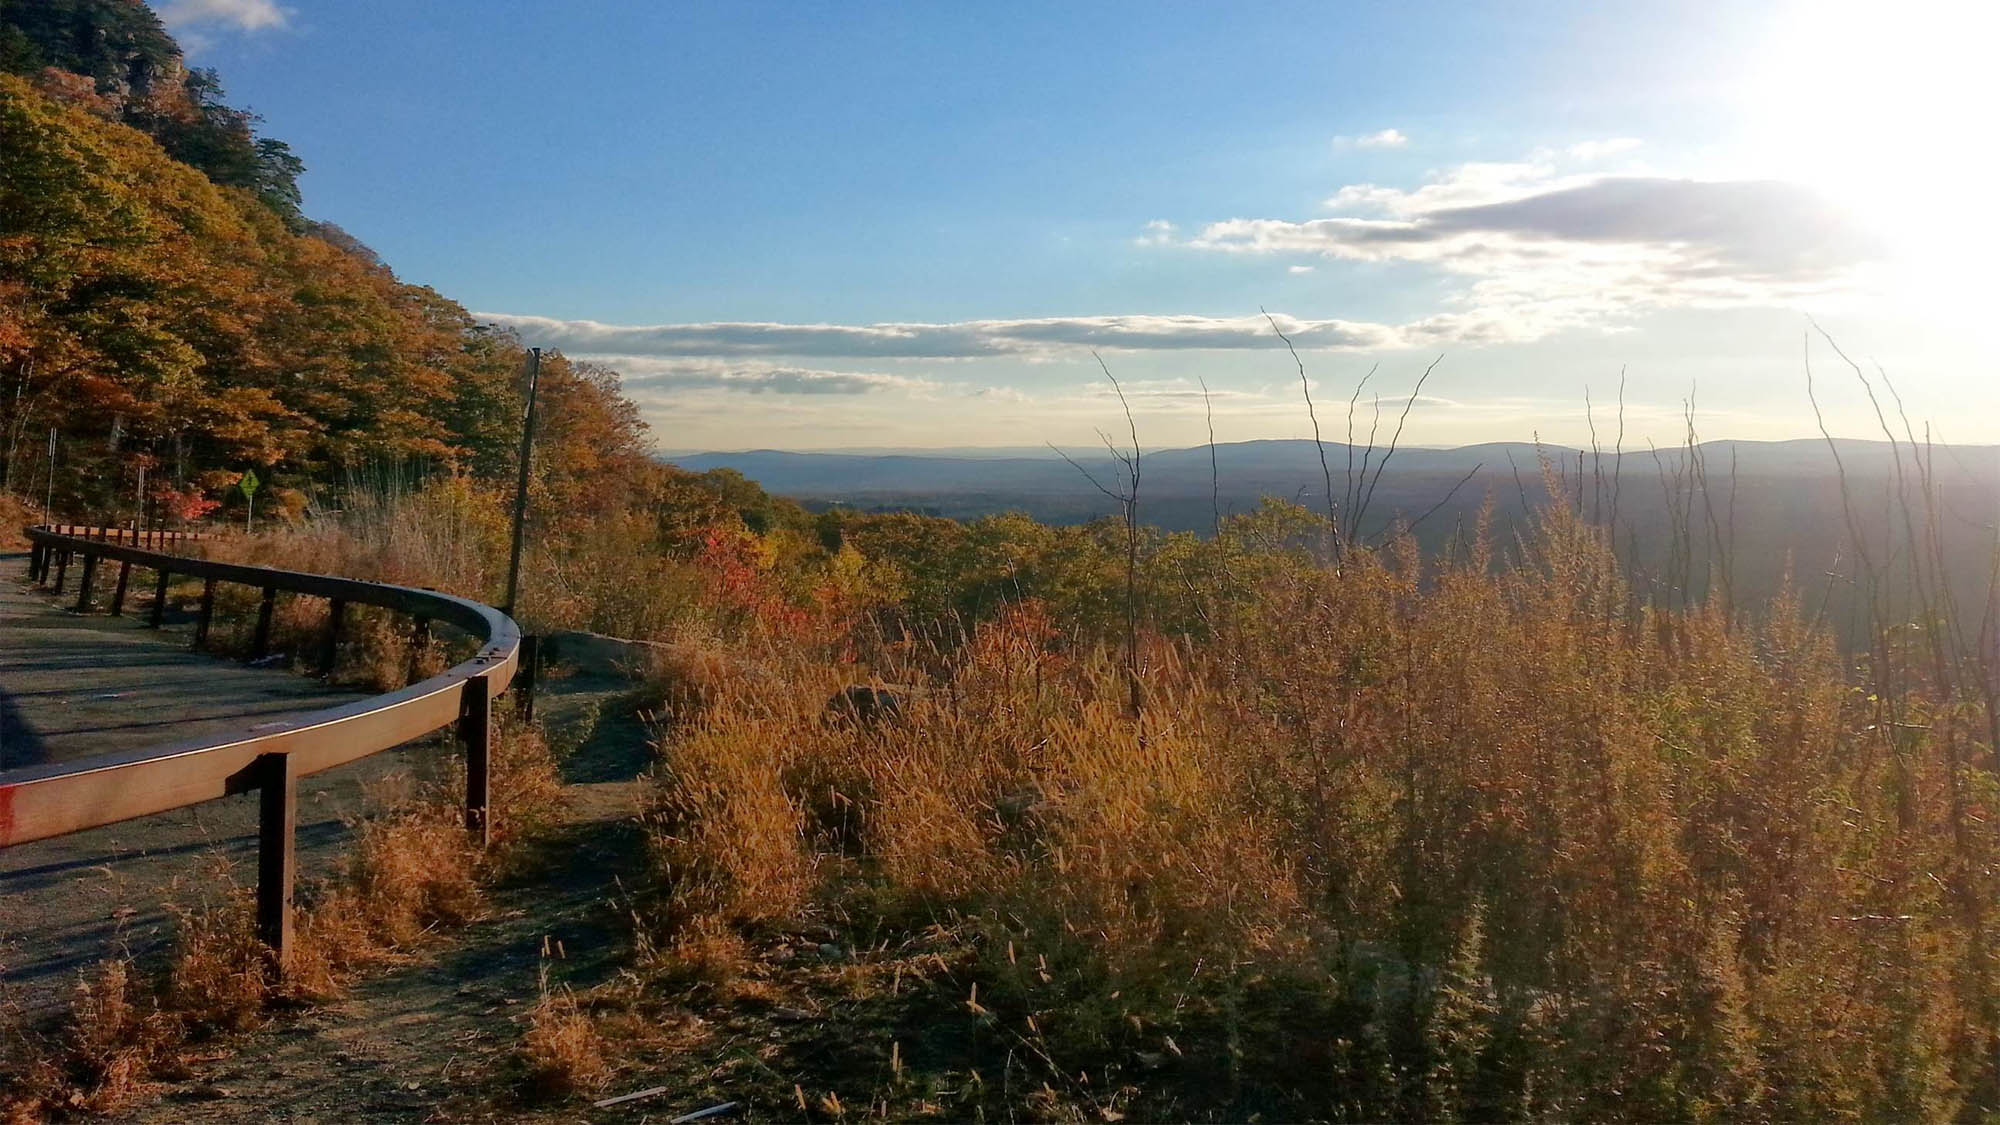 Curvy scenic fall road overlooking Gunks cliffs in New York